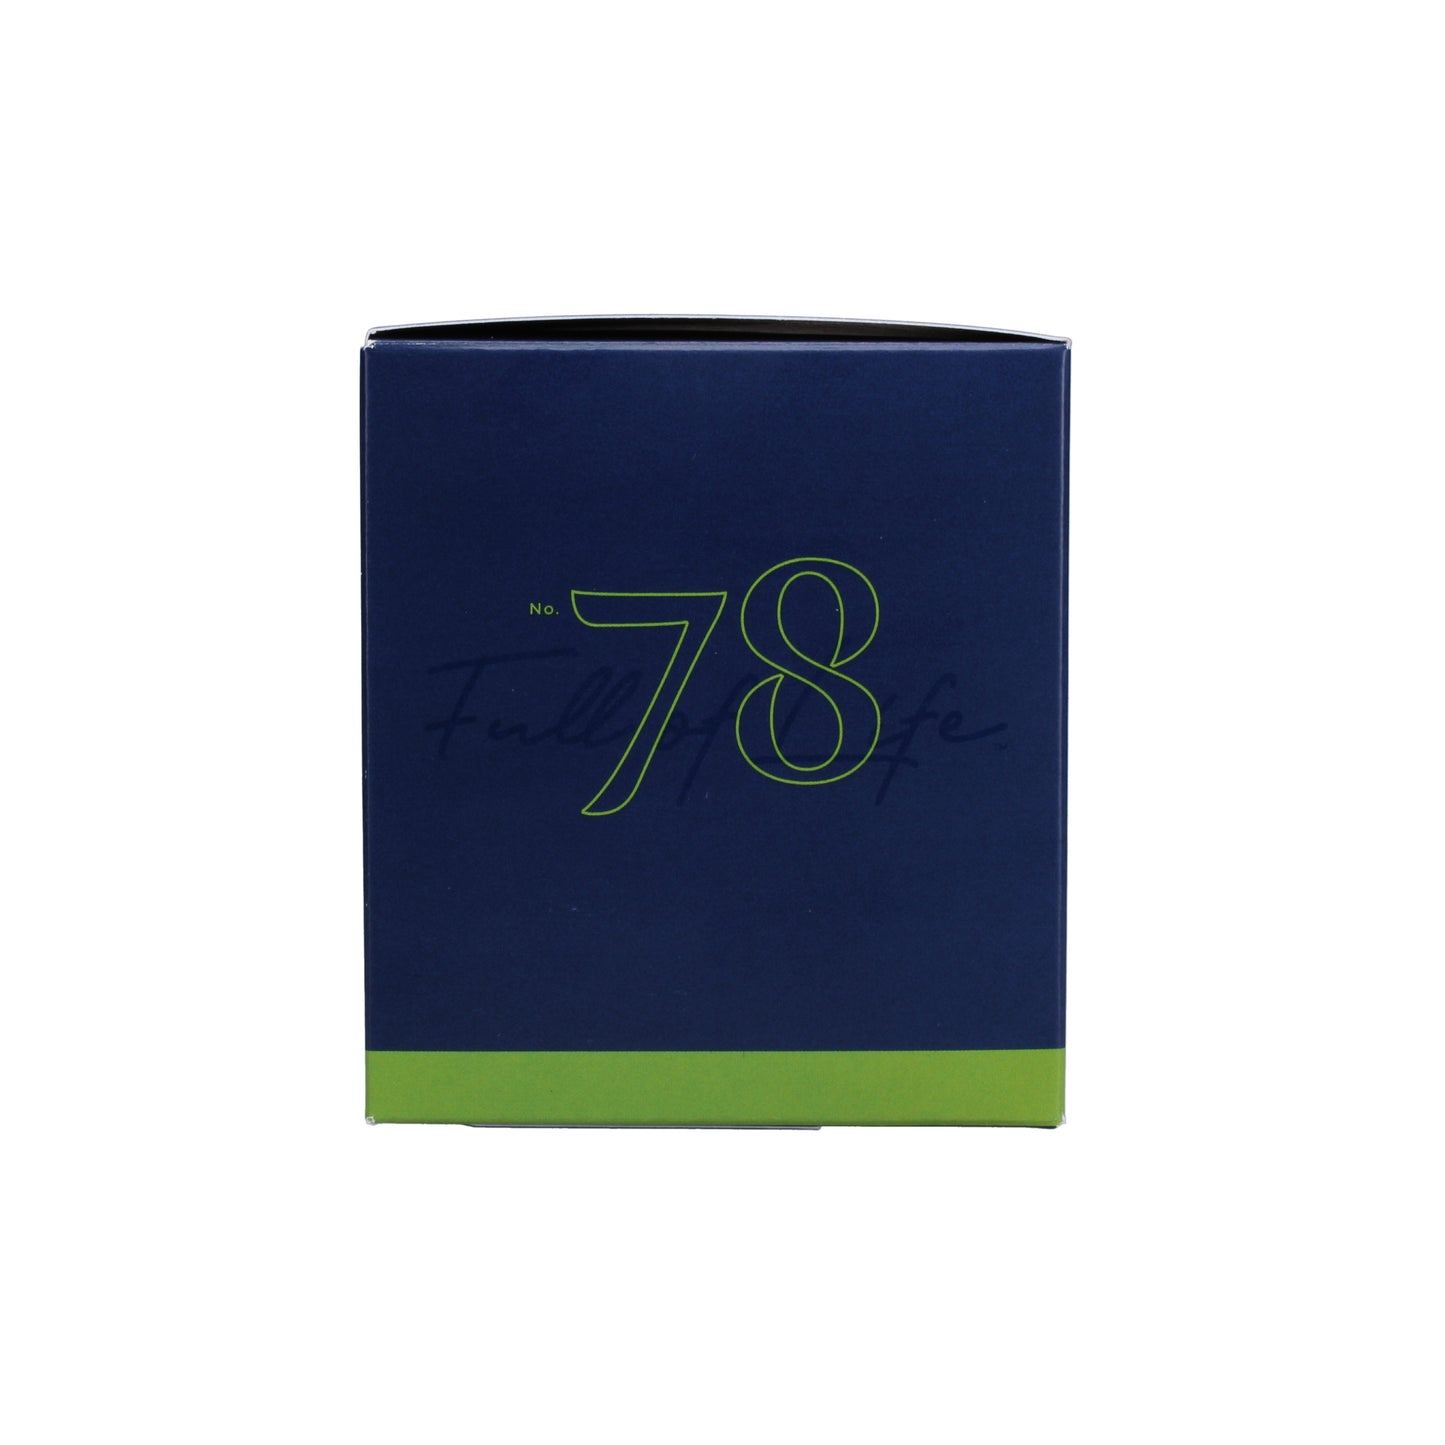 No. 78 Ginger Sage 7 oz. Candle in Signature Box Image 6